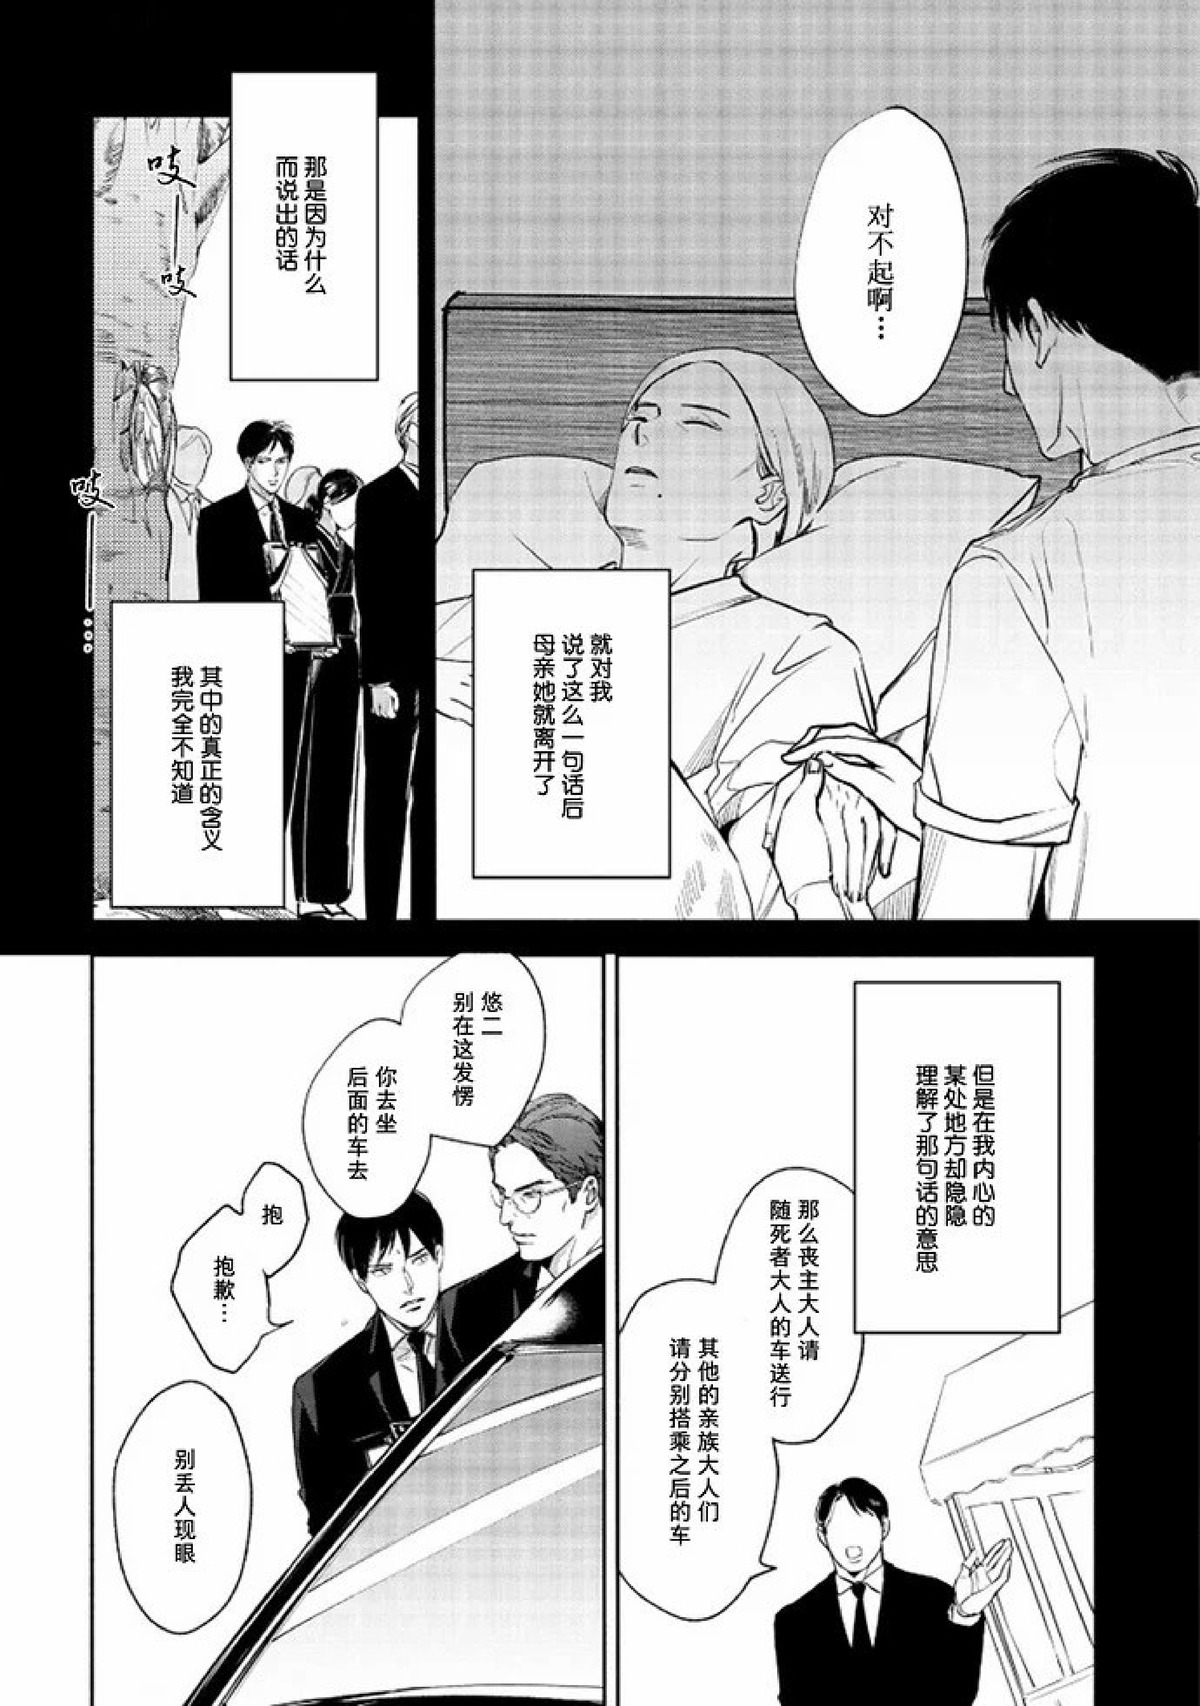 【Two sides of the same coin[腐漫]】漫画-（上卷01-02）章节漫画下拉式图片-14.jpg